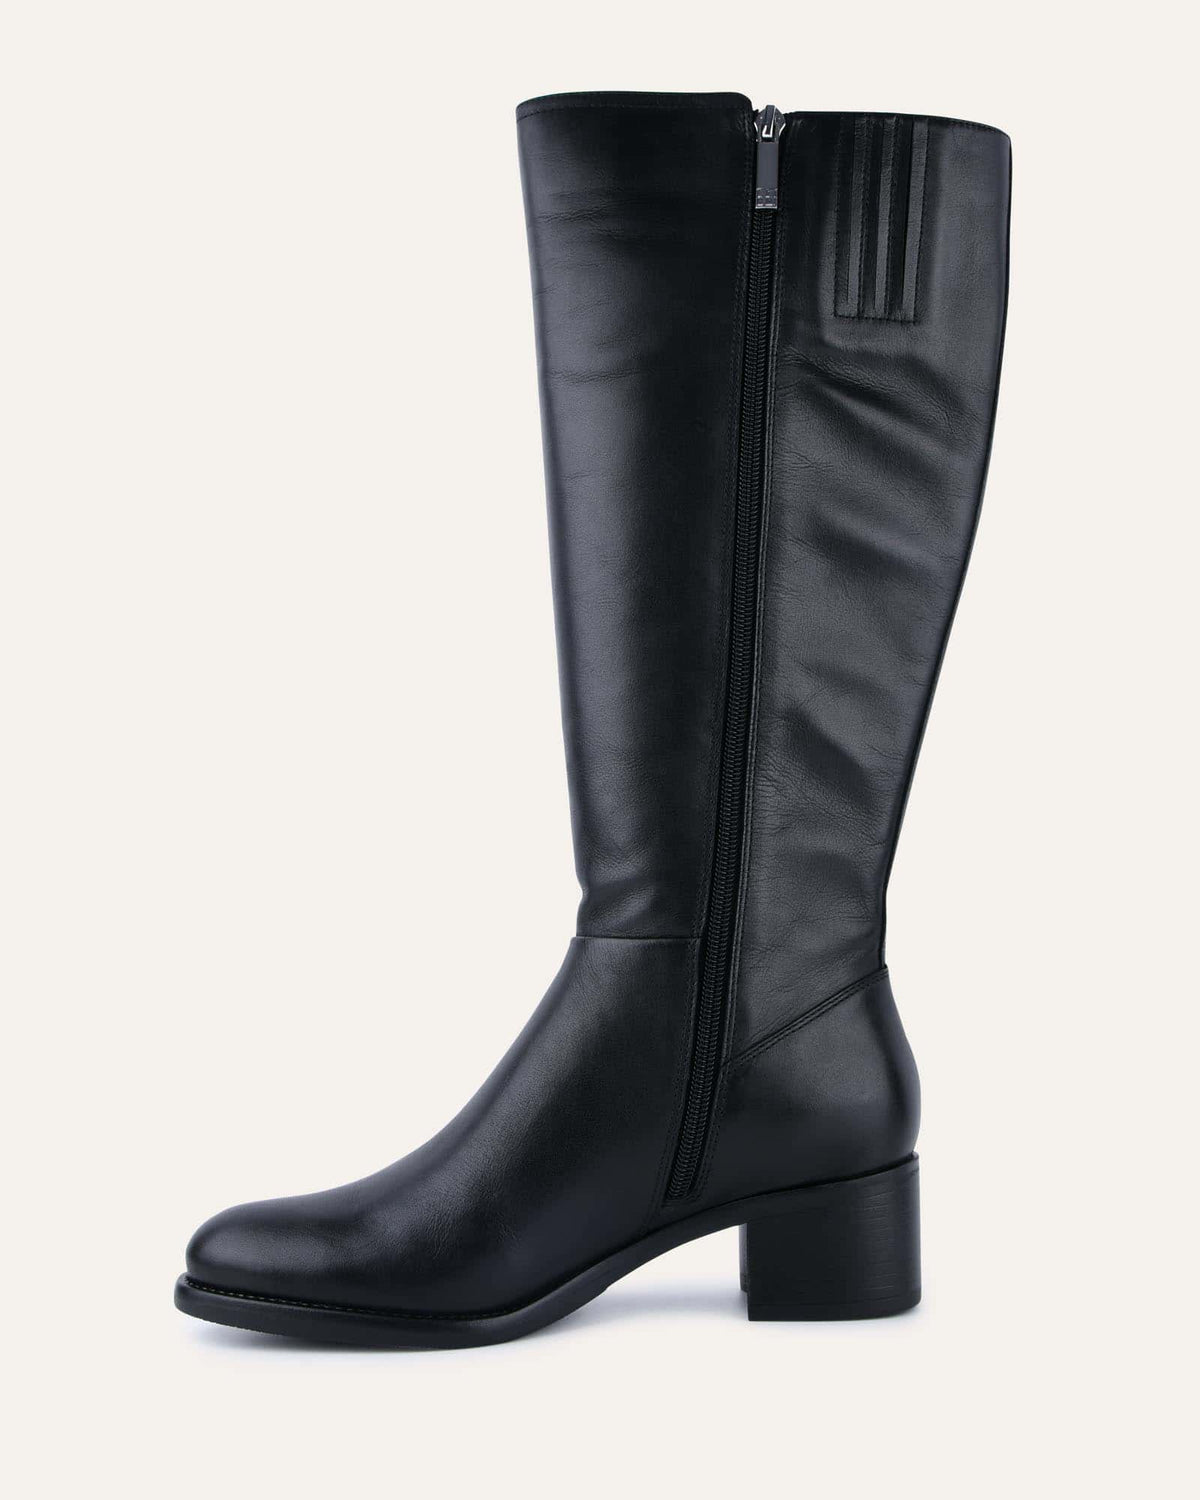 CHICAGO KNEE BOOTS BLACK LEATHER